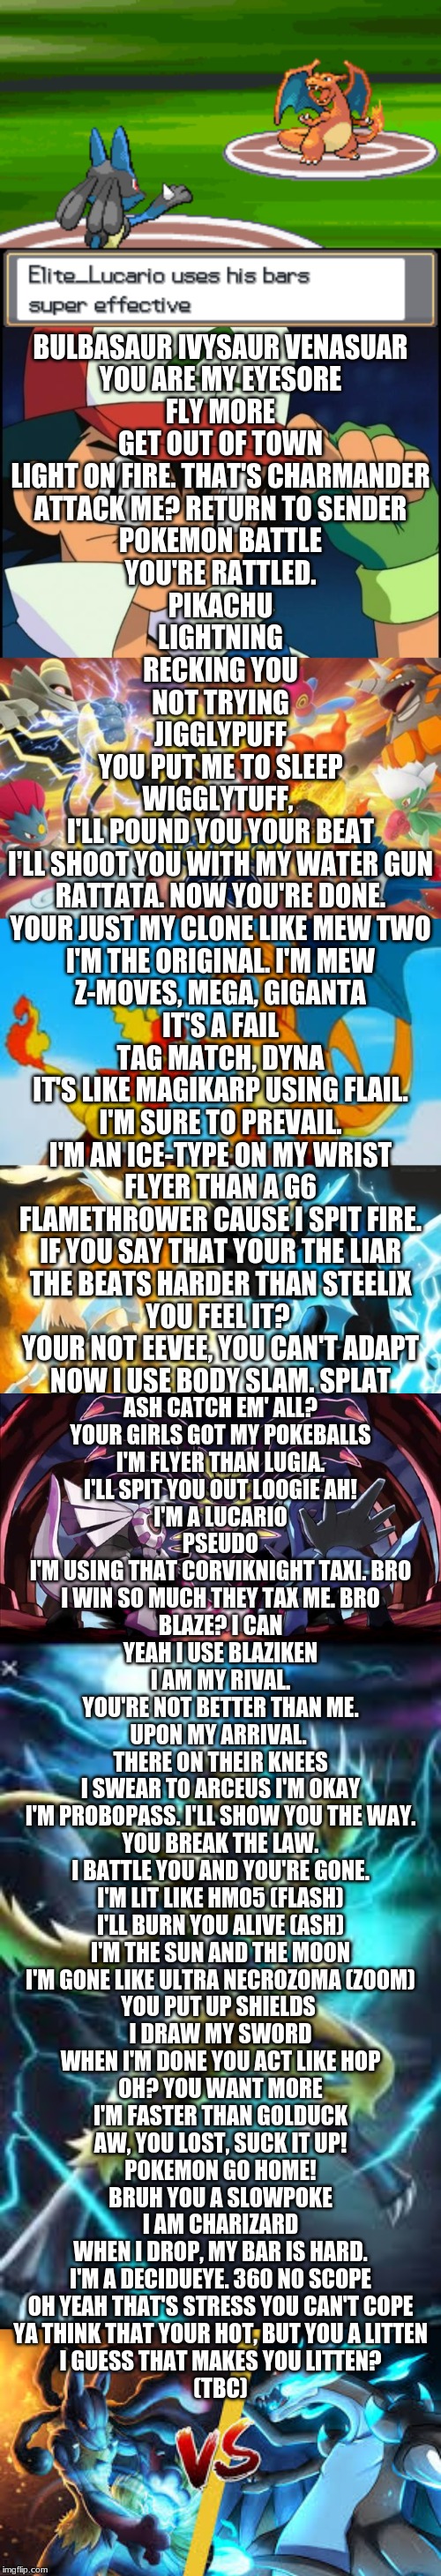 just a little something I was makin.(I don't need a beat. I already have a perfect one) if you have ideas for lines, let me know | BULBASAUR IVYSAUR VENASUAR
YOU ARE MY EYESORE
FLY MORE
GET OUT OF TOWN
LIGHT ON FIRE. THAT'S CHARMANDER
ATTACK ME? RETURN TO SENDER
POKEMON BATTLE
YOU'RE RATTLED.
PIKACHU
LIGHTNING
RECKING YOU
NOT TRYING
JIGGLYPUFF
YOU PUT ME TO SLEEP
WIGGLYTUFF, 
I'LL POUND YOU YOUR BEAT
I'LL SHOOT YOU WITH MY WATER GUN
RATTATA. NOW YOU'RE DONE.
YOUR JUST MY CLONE LIKE MEW TWO
I'M THE ORIGINAL. I'M MEW
Z-MOVES, MEGA, GIGANTA
IT'S A FAIL
TAG MATCH, DYNA
IT'S LIKE MAGIKARP USING FLAIL.
I'M SURE TO PREVAIL.
I'M AN ICE-TYPE ON MY WRIST
FLYER THAN A G6
FLAMETHROWER CAUSE I SPIT FIRE.
IF YOU SAY THAT YOUR THE LIAR
THE BEATS HARDER THAN STEELIX
YOU FEEL IT? 
YOUR NOT EEVEE, YOU CAN'T ADAPT
NOW I USE BODY SLAM. SPLAT; ASH CATCH EM' ALL?
YOUR GIRLS GOT MY POKEBALLS
I'M FLYER THAN LUGIA.
I'LL SPIT YOU OUT LOOGIE AH!
I'M A LUCARIO
PSEUDO
I'M USING THAT CORVIKNIGHT TAXI. BRO
I WIN SO MUCH THEY TAX ME. BRO
BLAZE? I CAN
YEAH I USE BLAZIKEN
I AM MY RIVAL.
YOU'RE NOT BETTER THAN ME.
UPON MY ARRIVAL. 
THERE ON THEIR KNEES
I SWEAR TO ARCEUS I'M OKAY
I'M PROBOPASS. I'LL SHOW YOU THE WAY.
YOU BREAK THE LAW.
I BATTLE YOU AND YOU'RE GONE.
I'M LIT LIKE HM05 (FLASH)
I'LL BURN YOU ALIVE (ASH)
I'M THE SUN AND THE MOON
I'M GONE LIKE ULTRA NECROZOMA (ZOOM)
YOU PUT UP SHIELDS 
I DRAW MY SWORD
WHEN I'M DONE YOU ACT LIKE HOP
OH? YOU WANT MORE
I'M FASTER THAN GOLDUCK
AW, YOU LOST, SUCK IT UP!
POKEMON GO HOME!
BRUH YOU A SLOWPOKE
I AM CHARIZARD
WHEN I DROP, MY BAR IS HARD.
I'M A DECIDUEYE. 360 NO SCOPE
OH YEAH THAT'S STRESS YOU CAN'T COPE
YA THINK THAT YOUR HOT, BUT YOU A LITTEN
I GUESS THAT MAKES YOU LITTEN?
(TBC) | image tagged in ash catchem all pokemon,pokerap,pokemon,battle | made w/ Imgflip meme maker